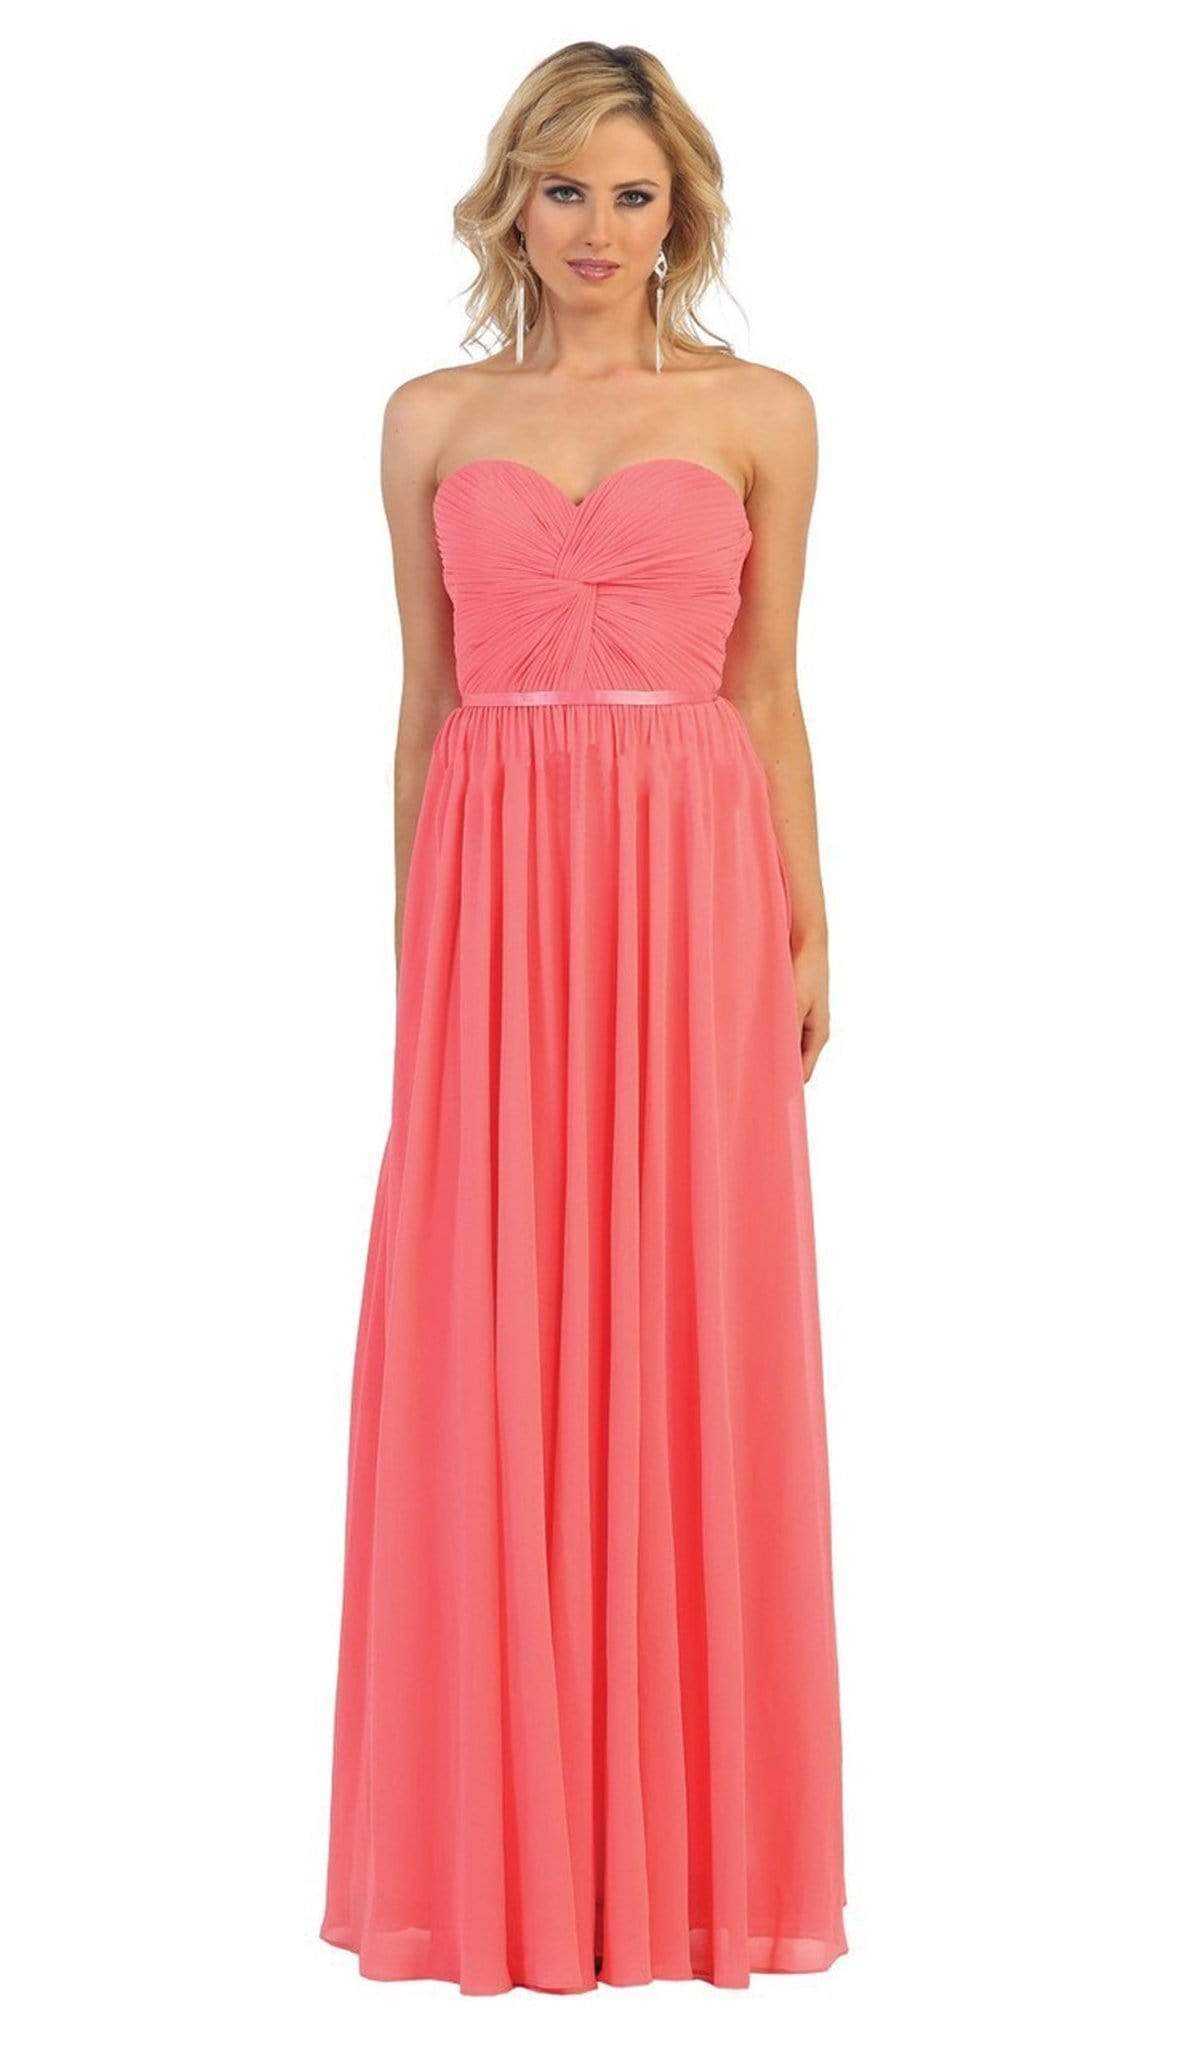 May Queen, May Queen - Strapless Ruched Sweetheart Chiffon Prom Dress